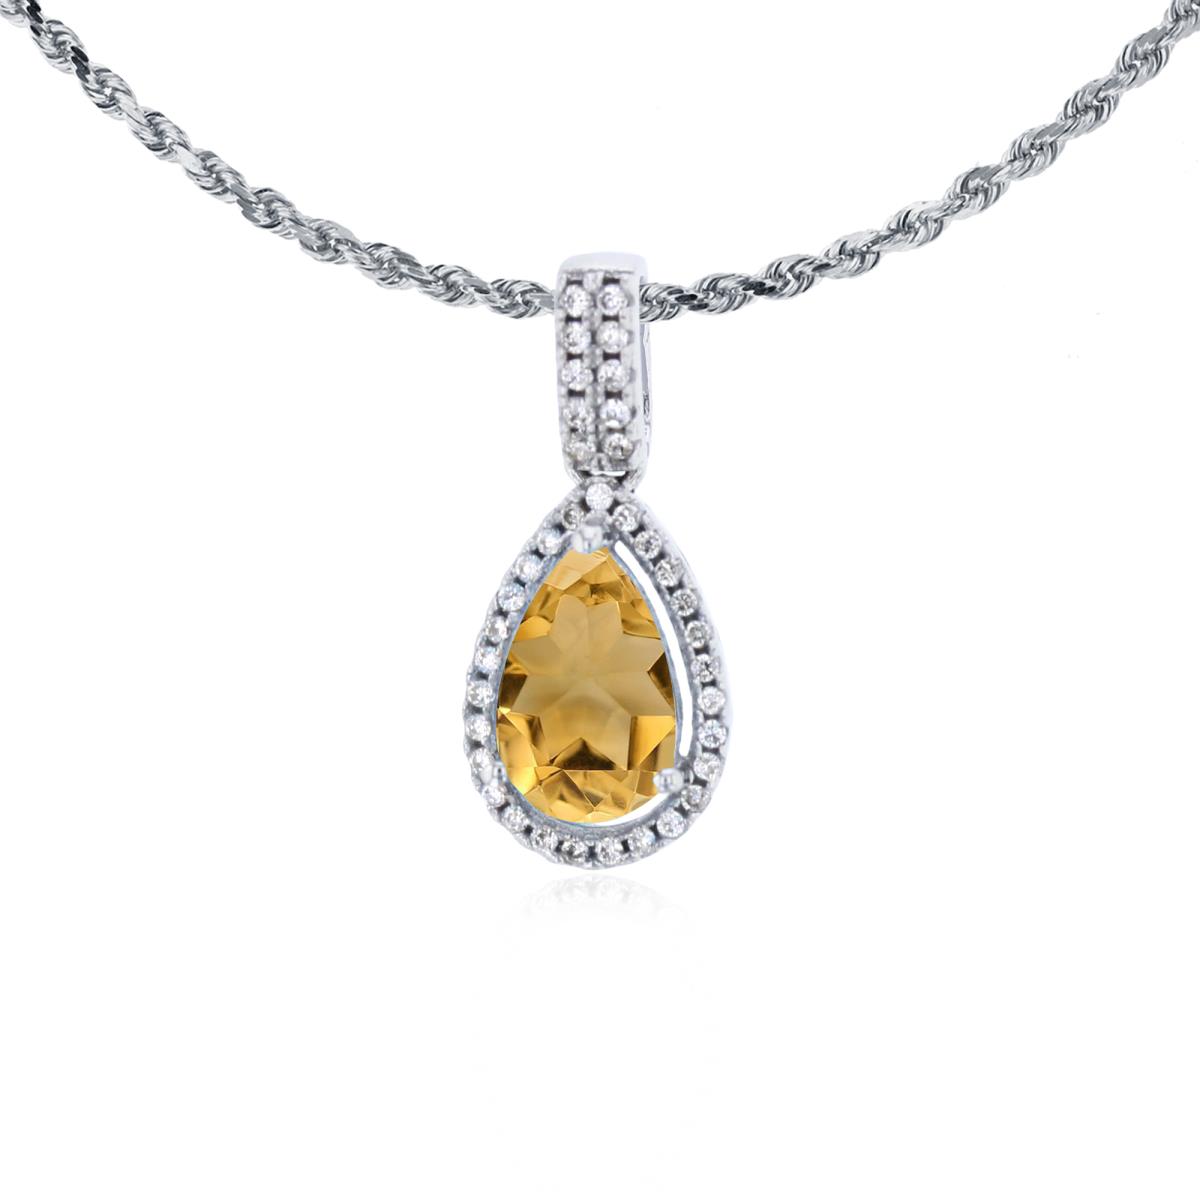 14K White Gold 8x5mm Pear Cut Citrine & 0.11 CTTW Diamond Halo 18" Rope Chain Necklace